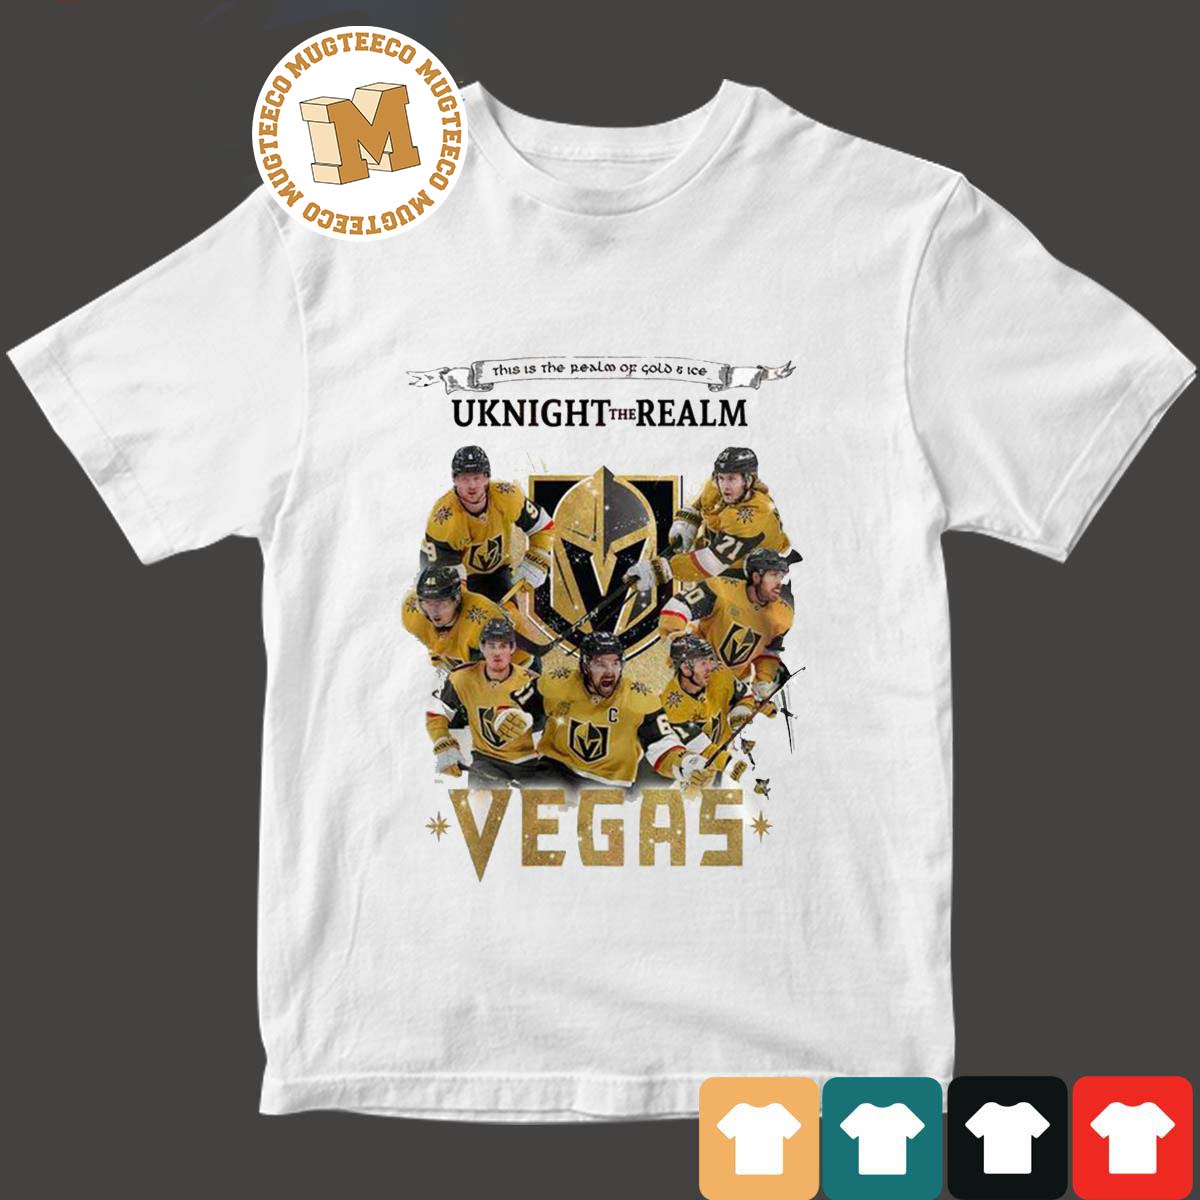 Cheap NHL Hockey The Realm Is Uknighted T Shirt, Vegas Golden